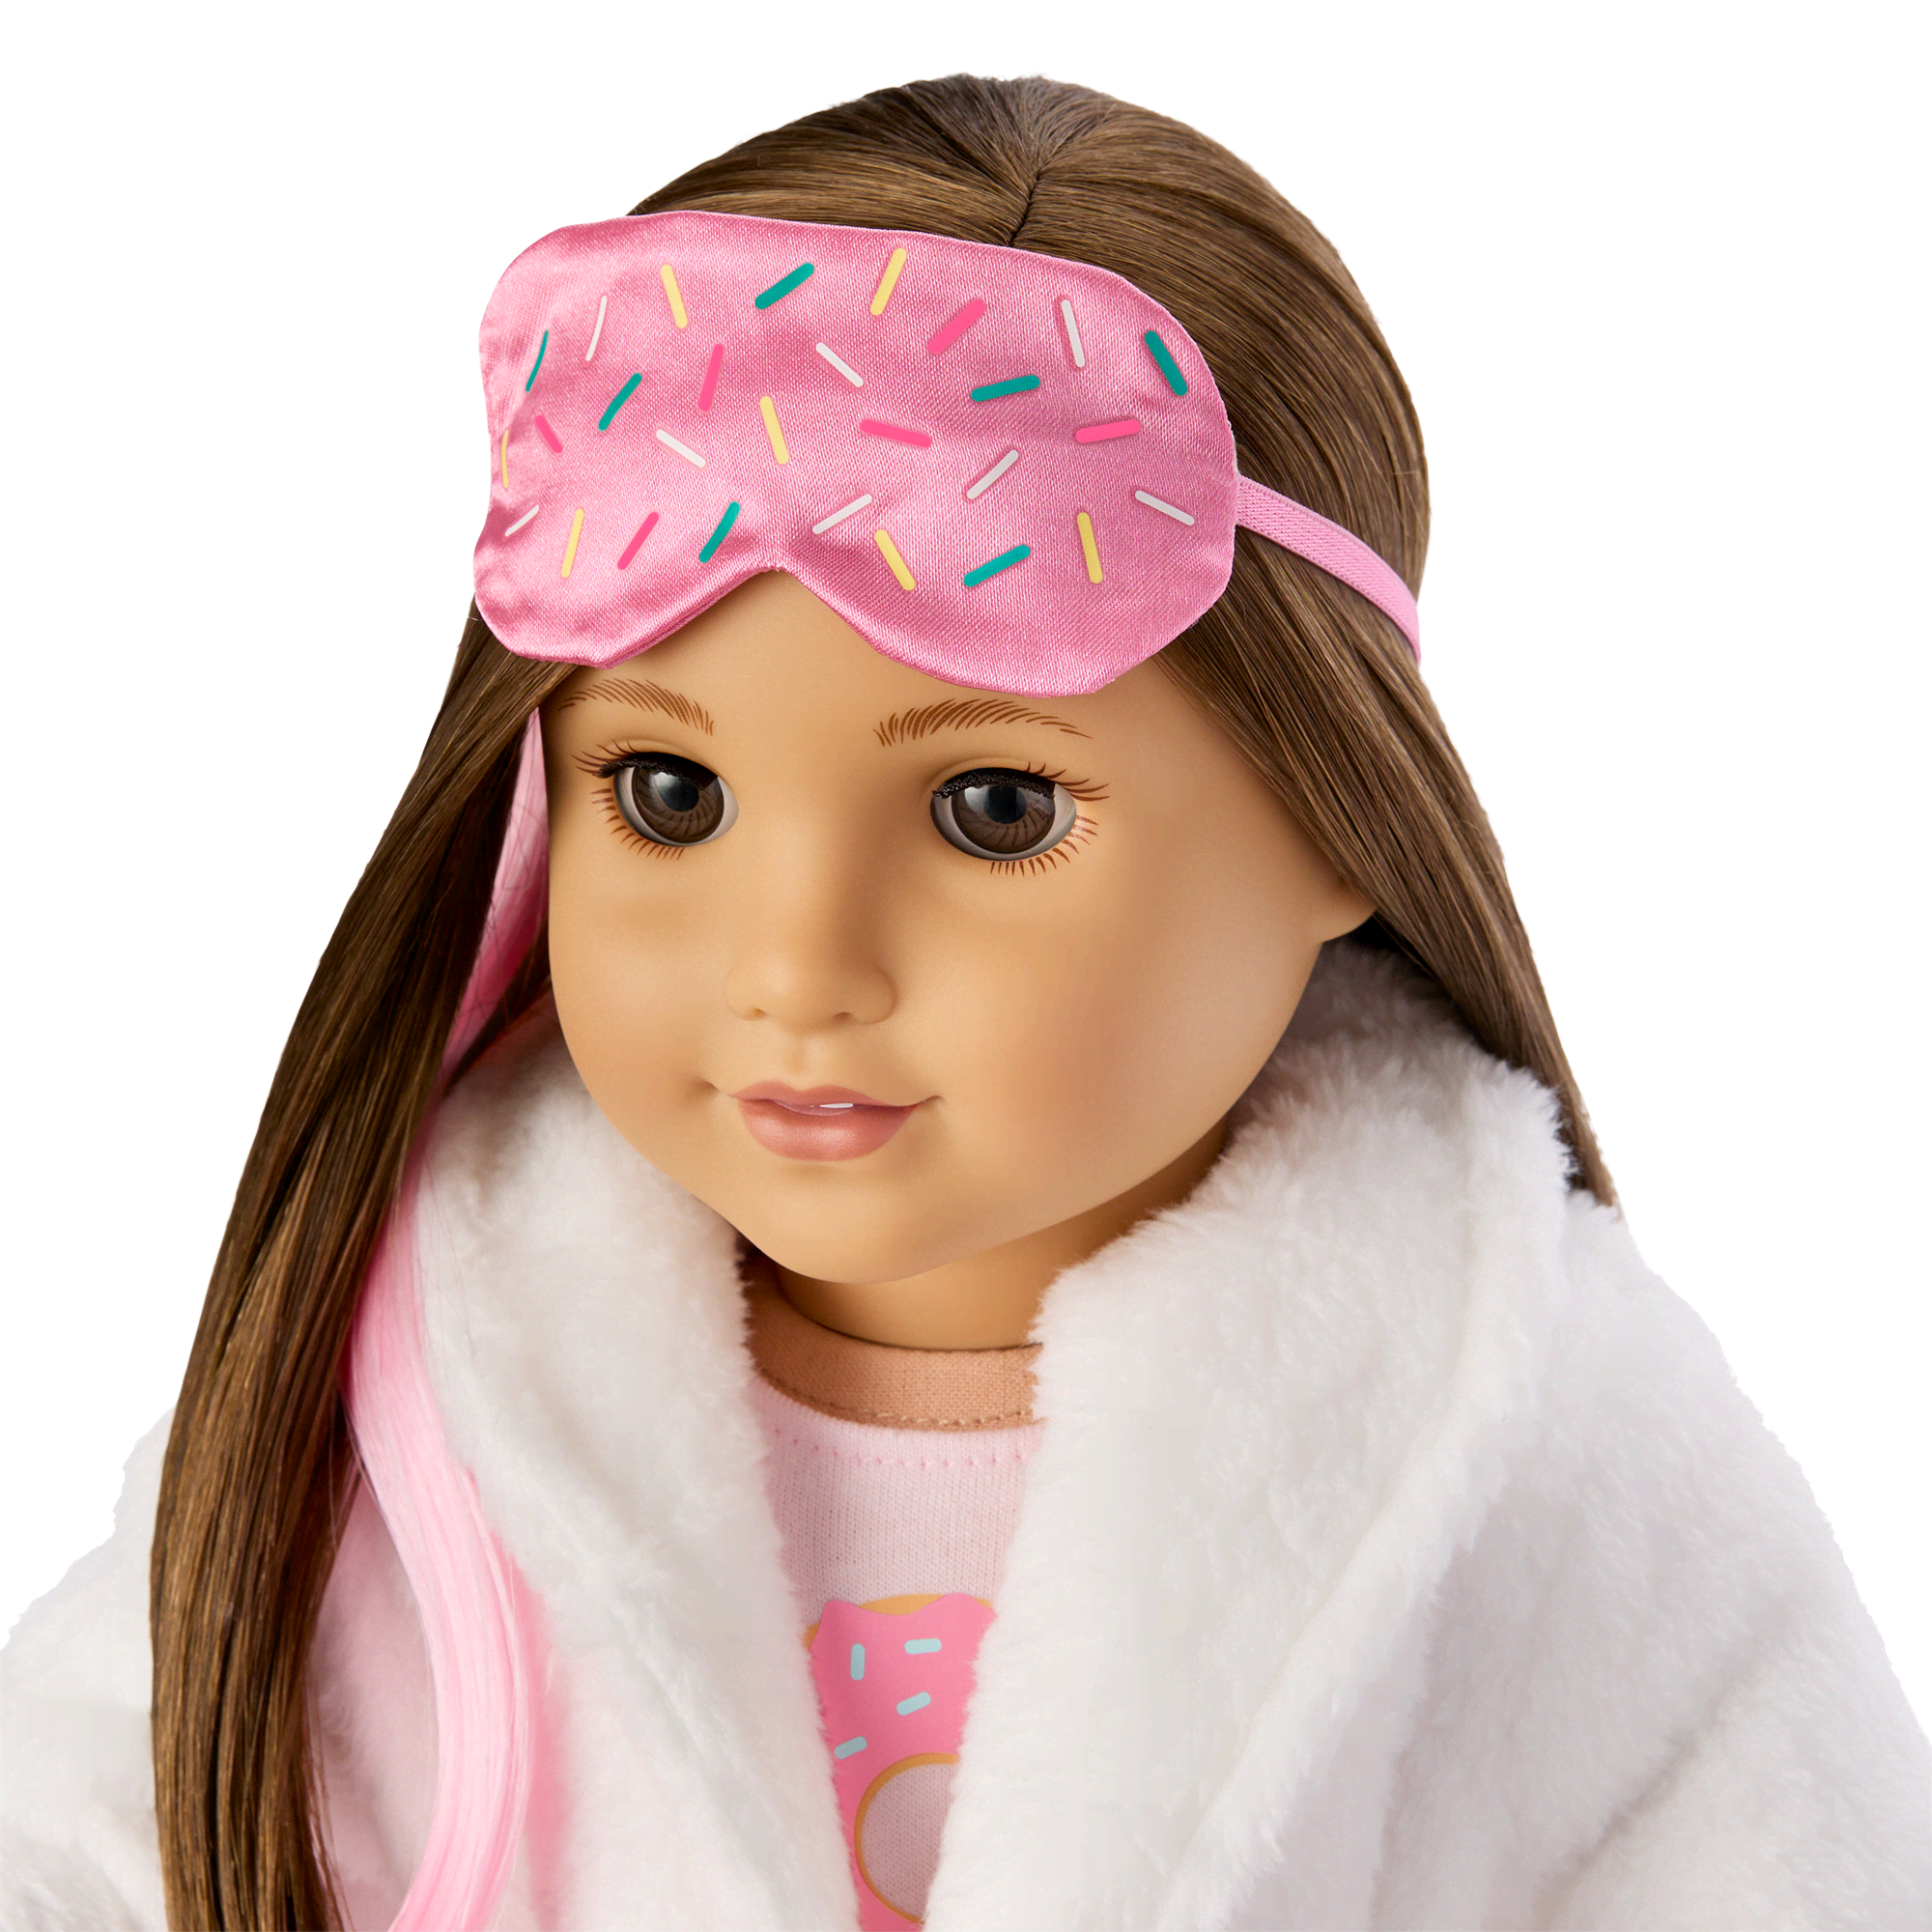 Sweetest Slumber-Party Set for 18-inch Dolls